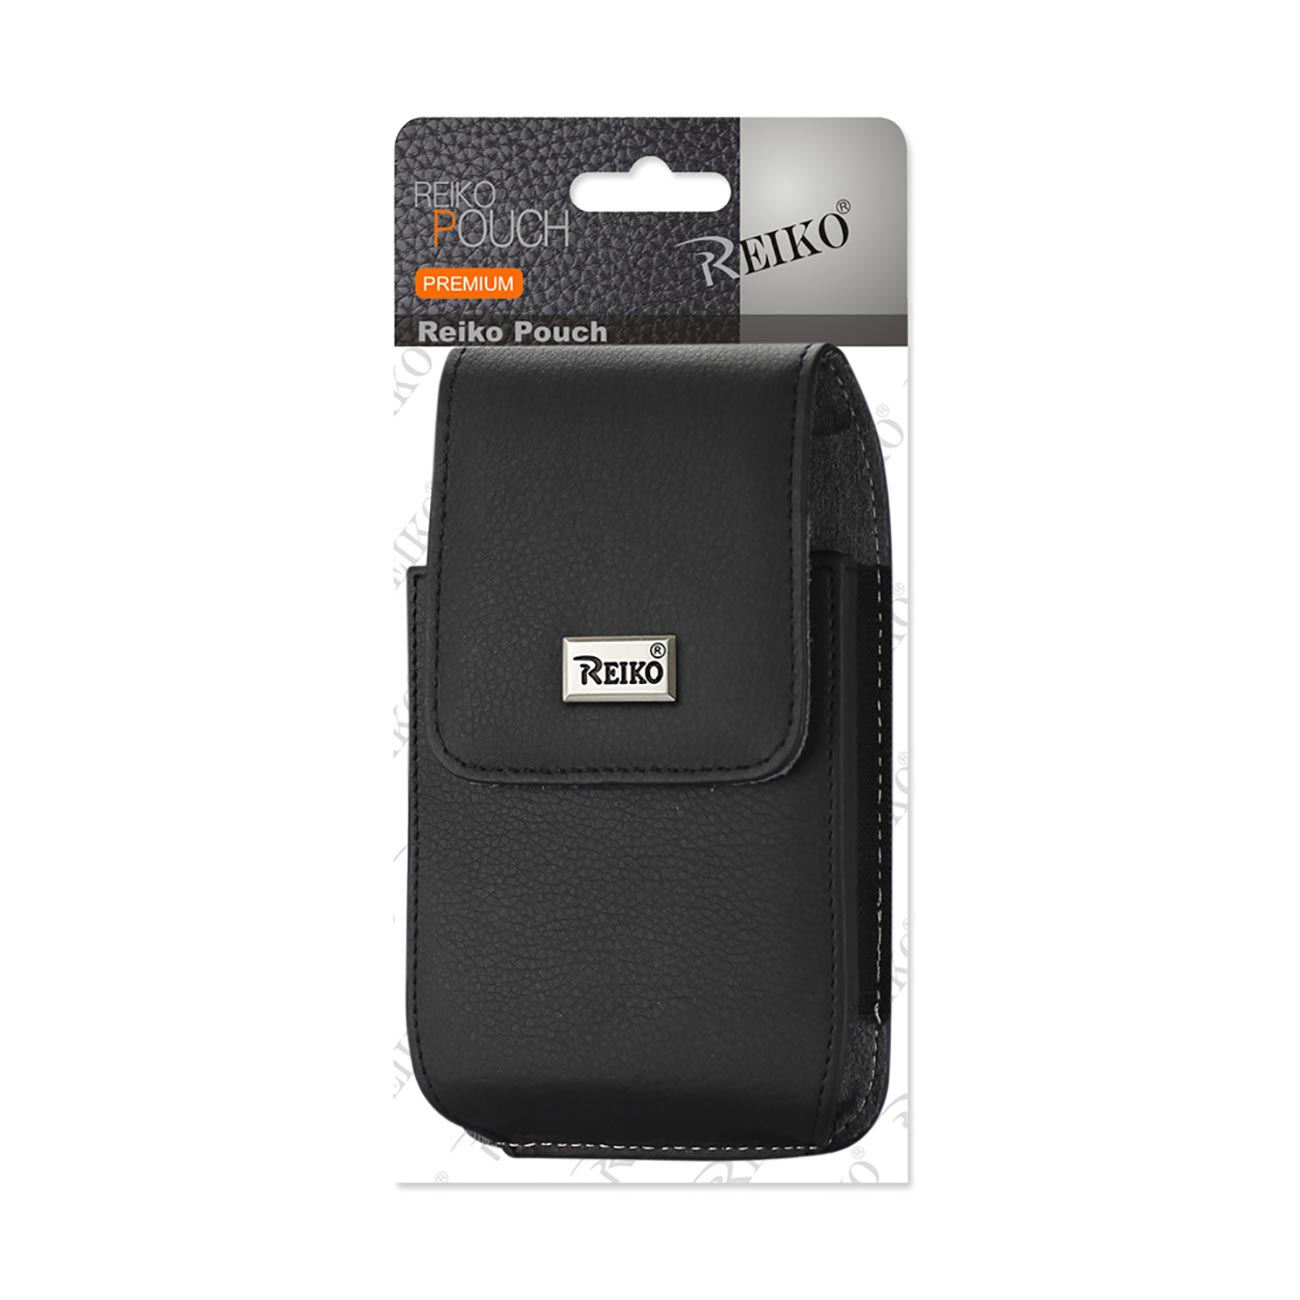 Vertical Leather Pouch/Phone Holster With Magnetic Closure And Belt Loop In Black